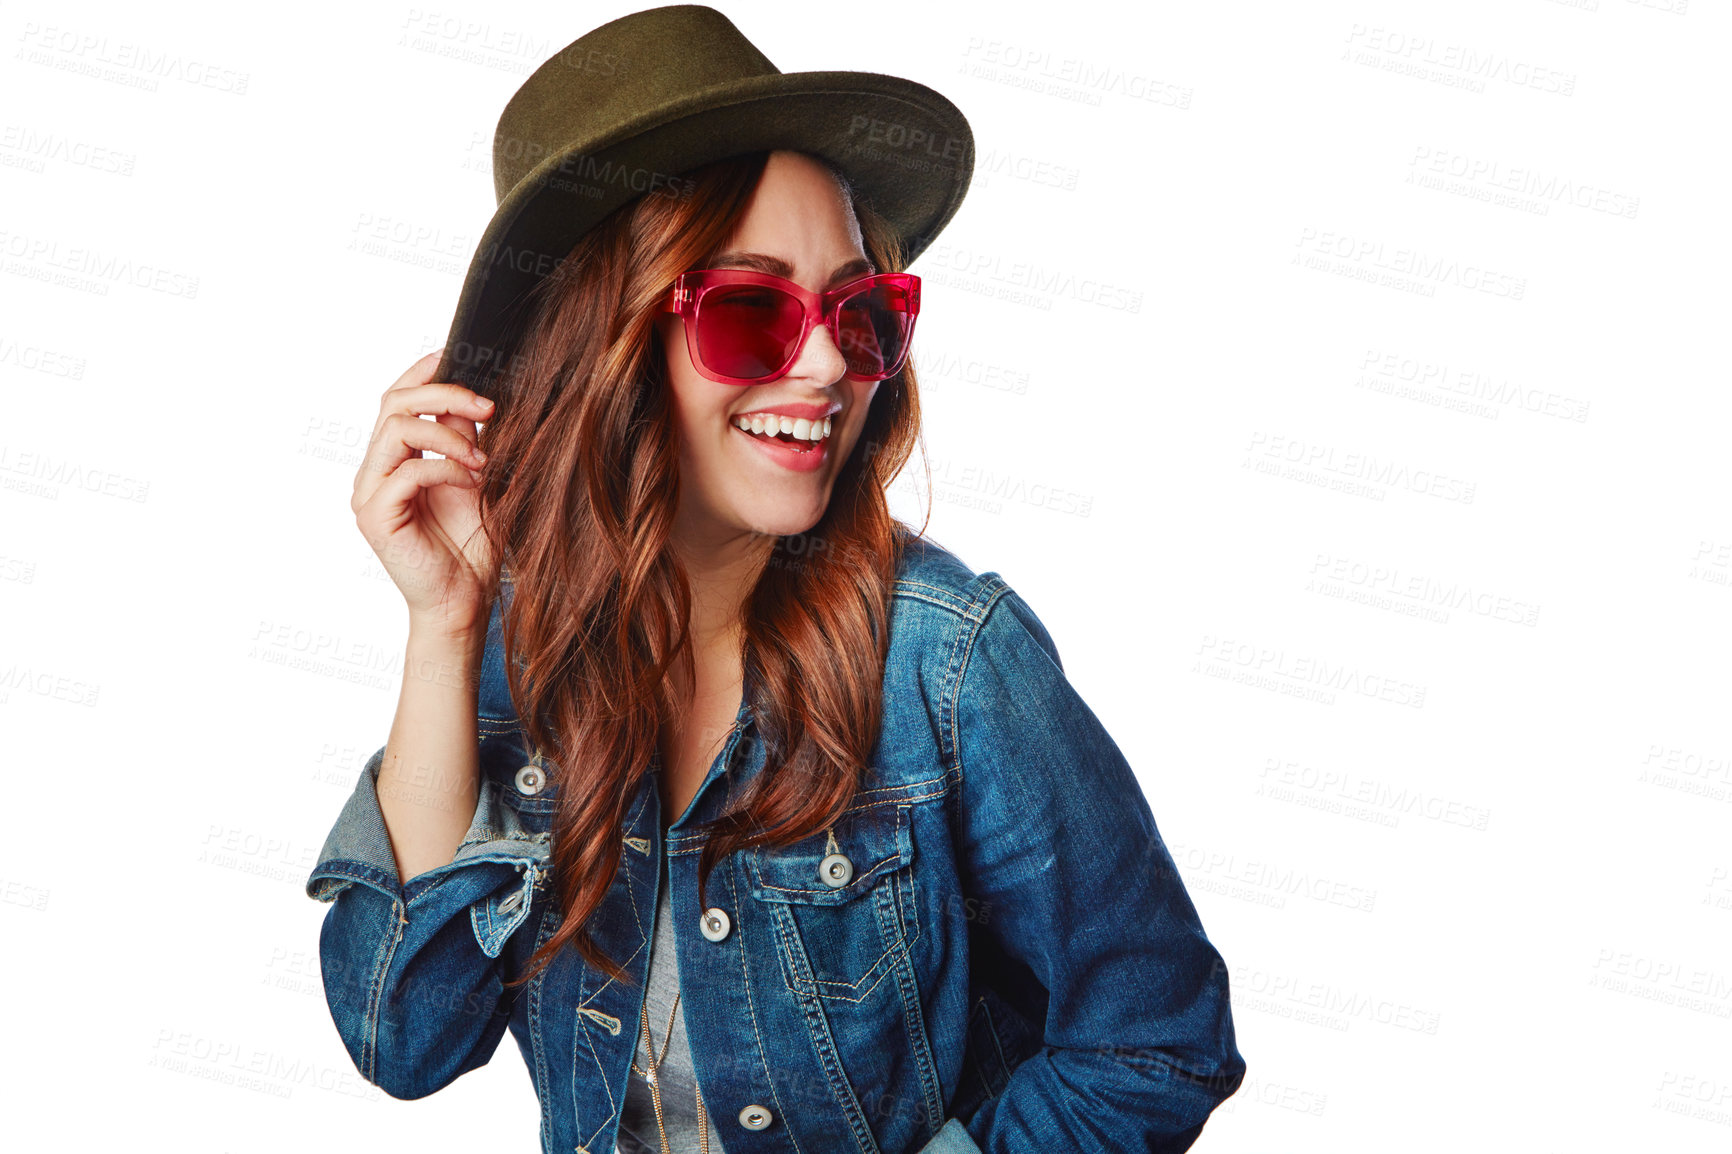 Buy stock photo Excited, youth and trendy fashion model with gen z style and funky sunglasses with happy smile. Happiness, cool and young fashionista girl with shades on isolated studio white background.

